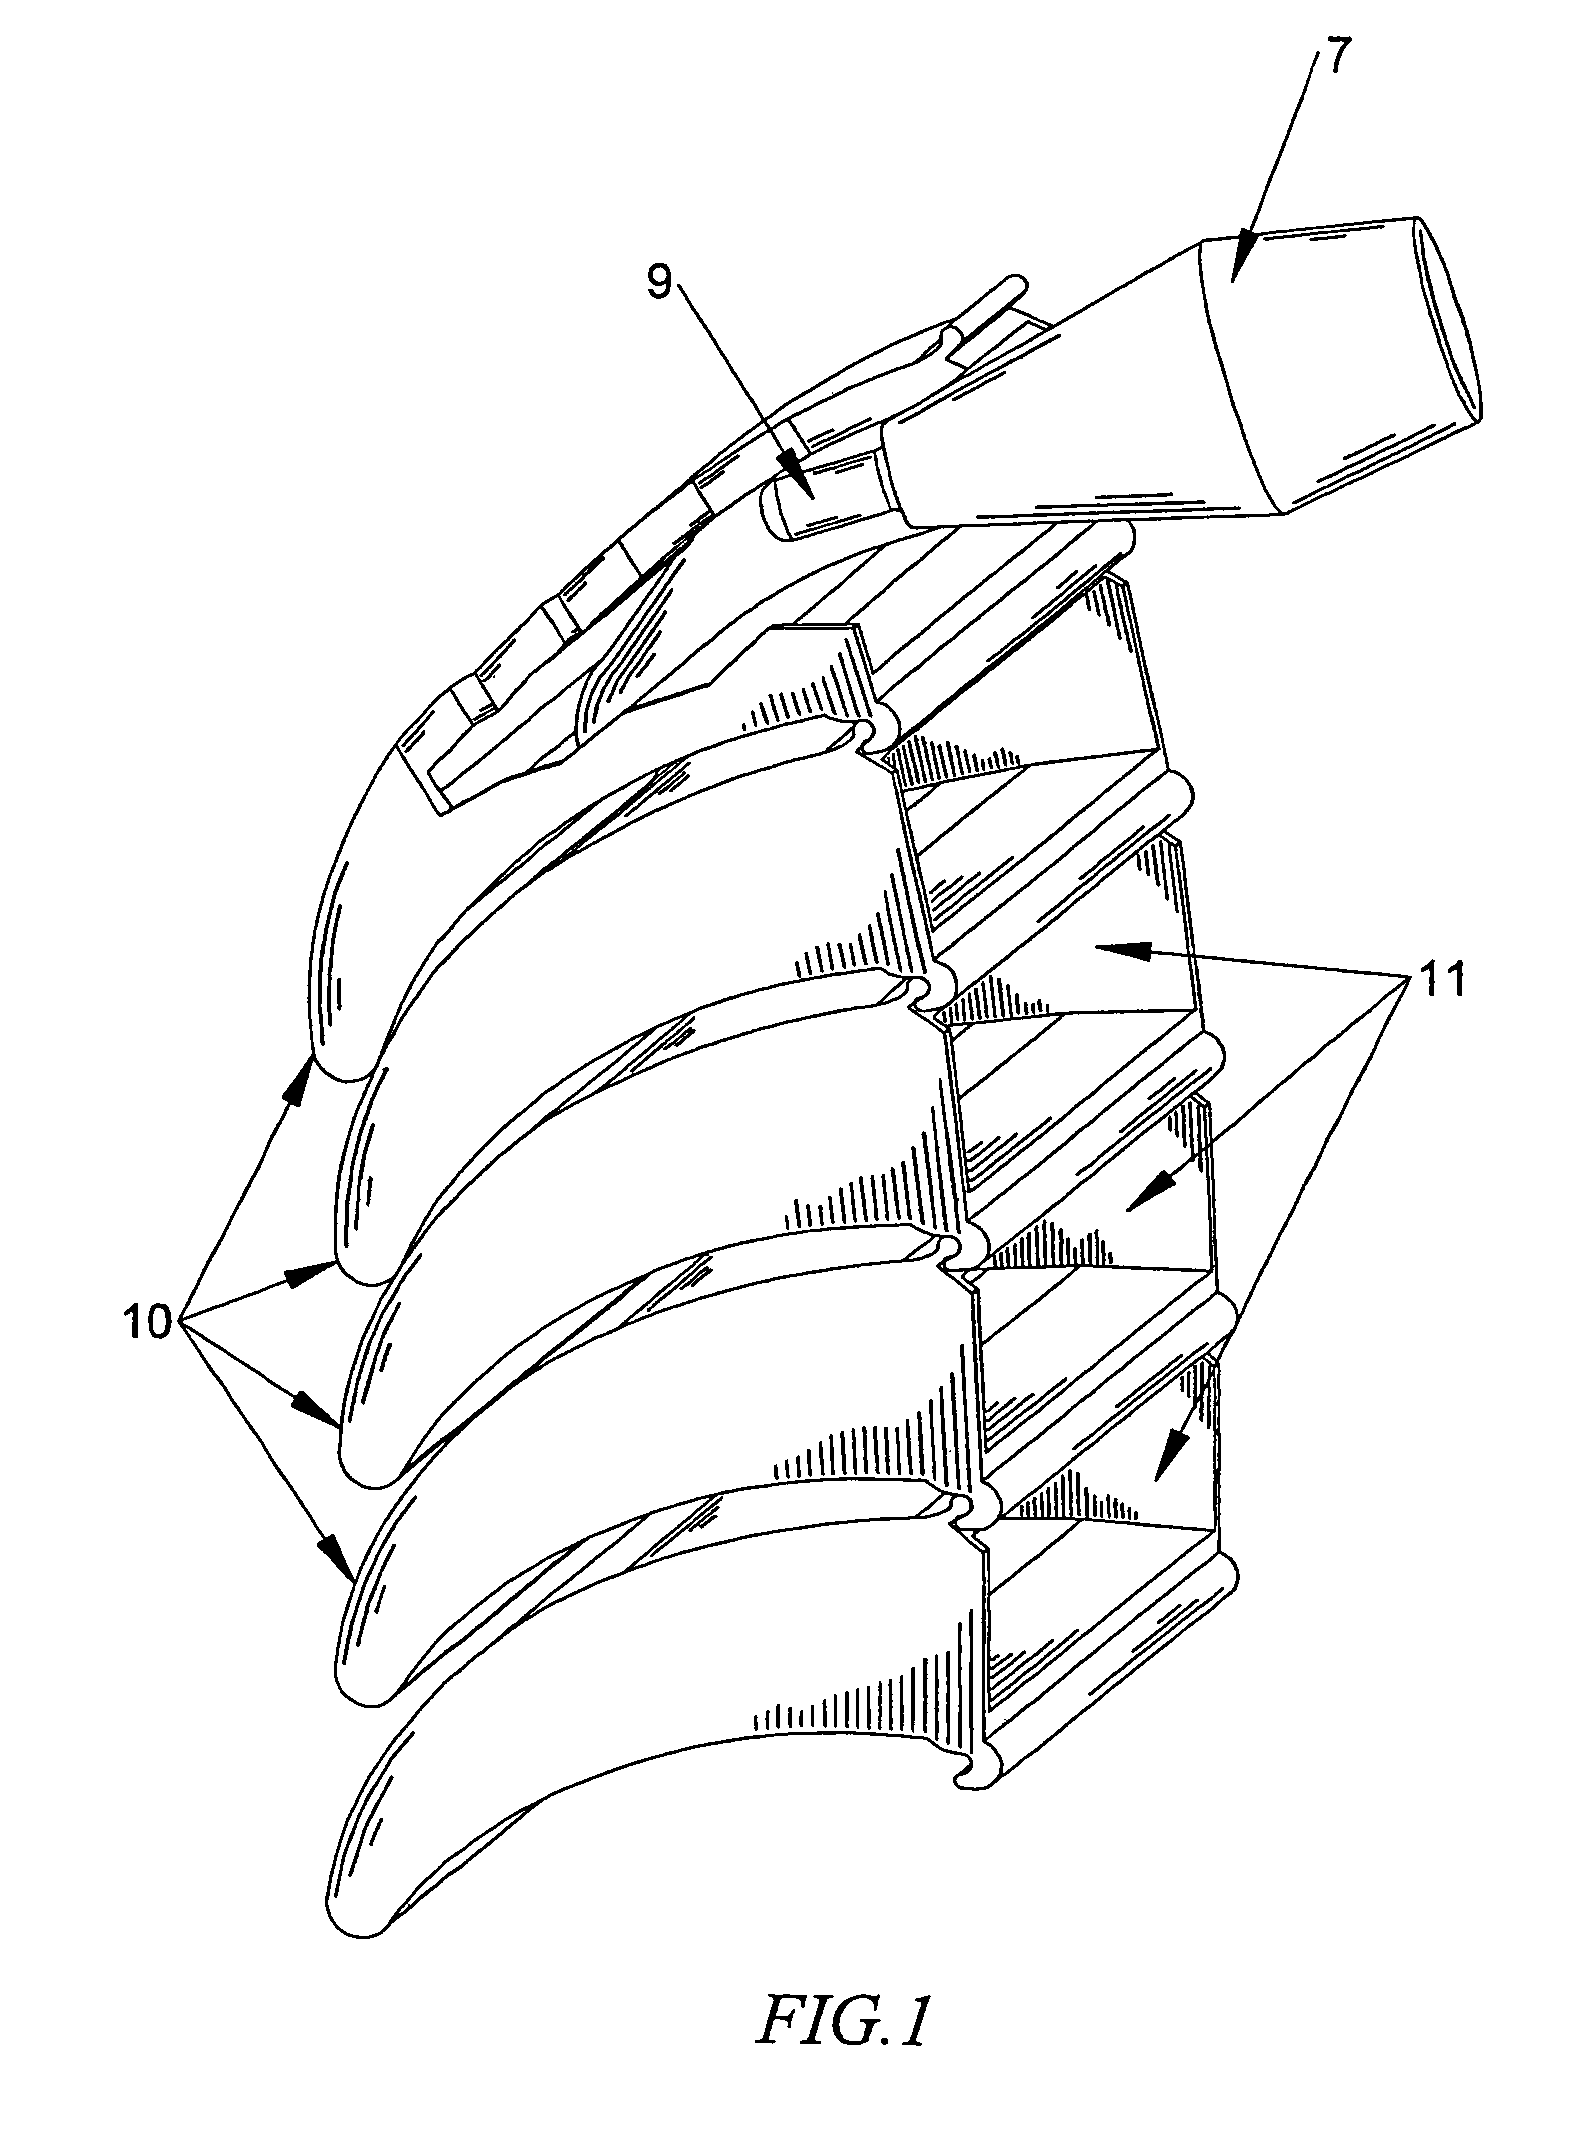 Enhanced light weight armor system with deflective operation